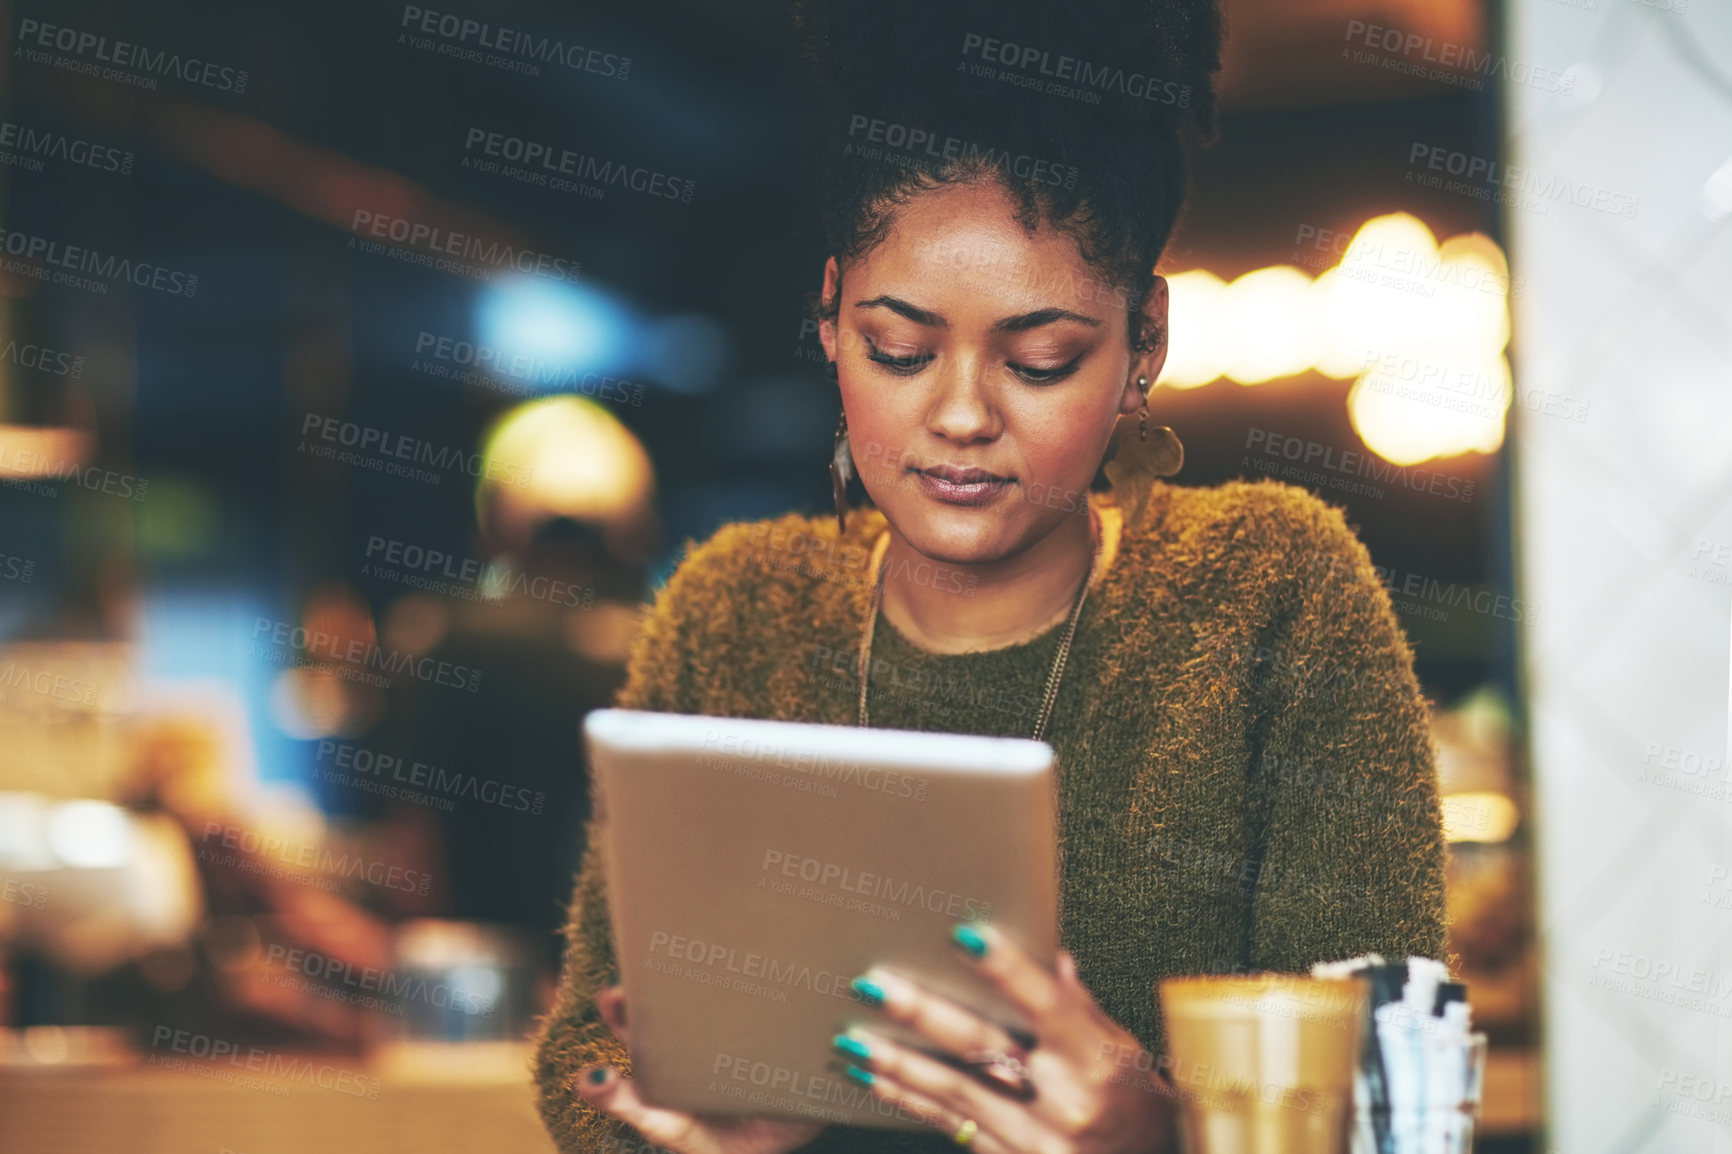 Buy stock photo Shot of a young woman using a digital tablet at a coffee shop